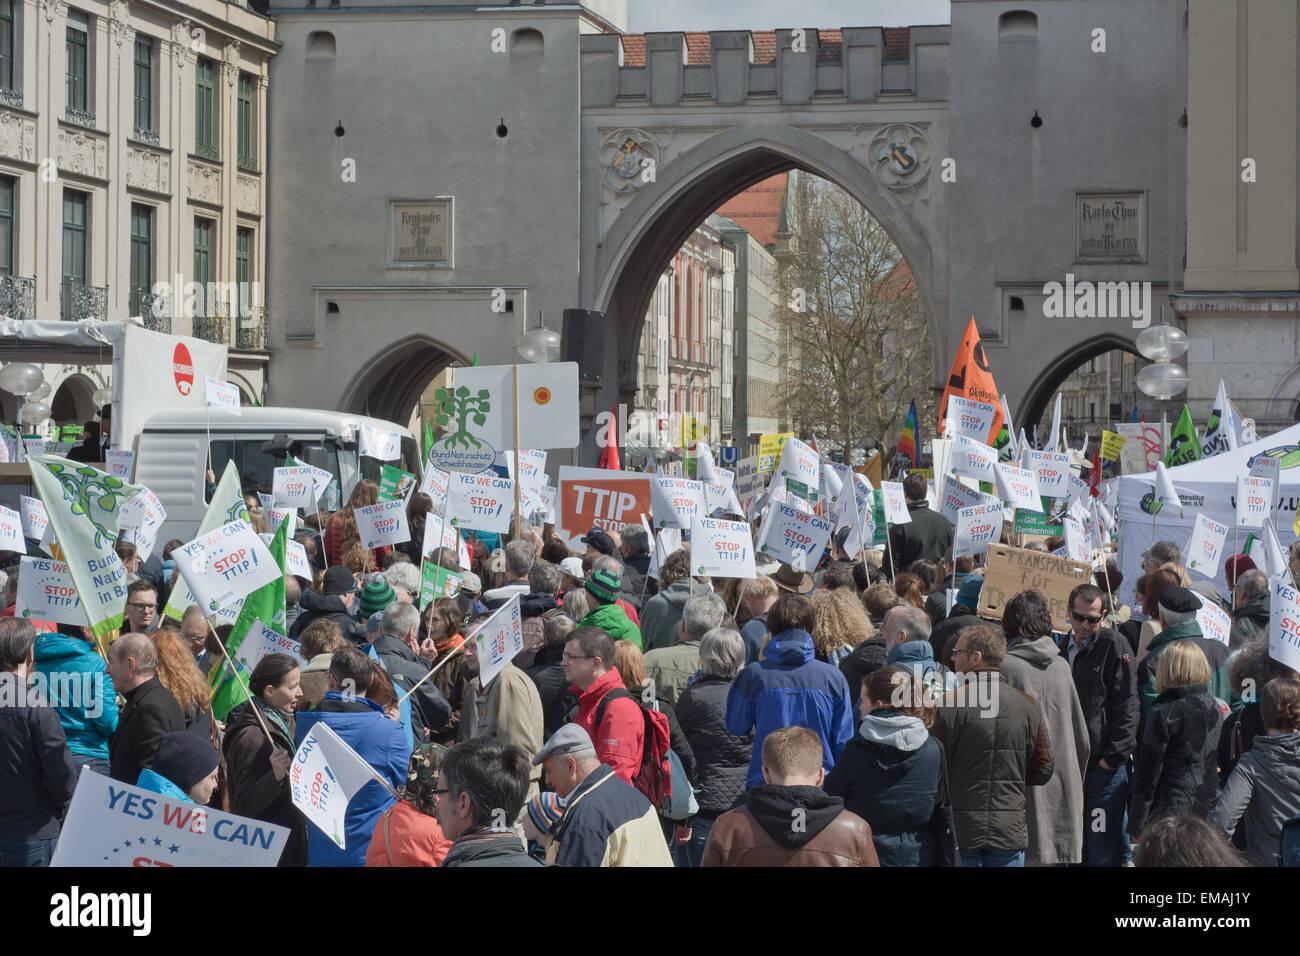 MUNICH, GERMANY – April 18, 2015:  Protesters turn out in force to protest TTIP trade deal, the Transatlantic Trade and Investment Partnership, in Munich Germany. Stock Photo